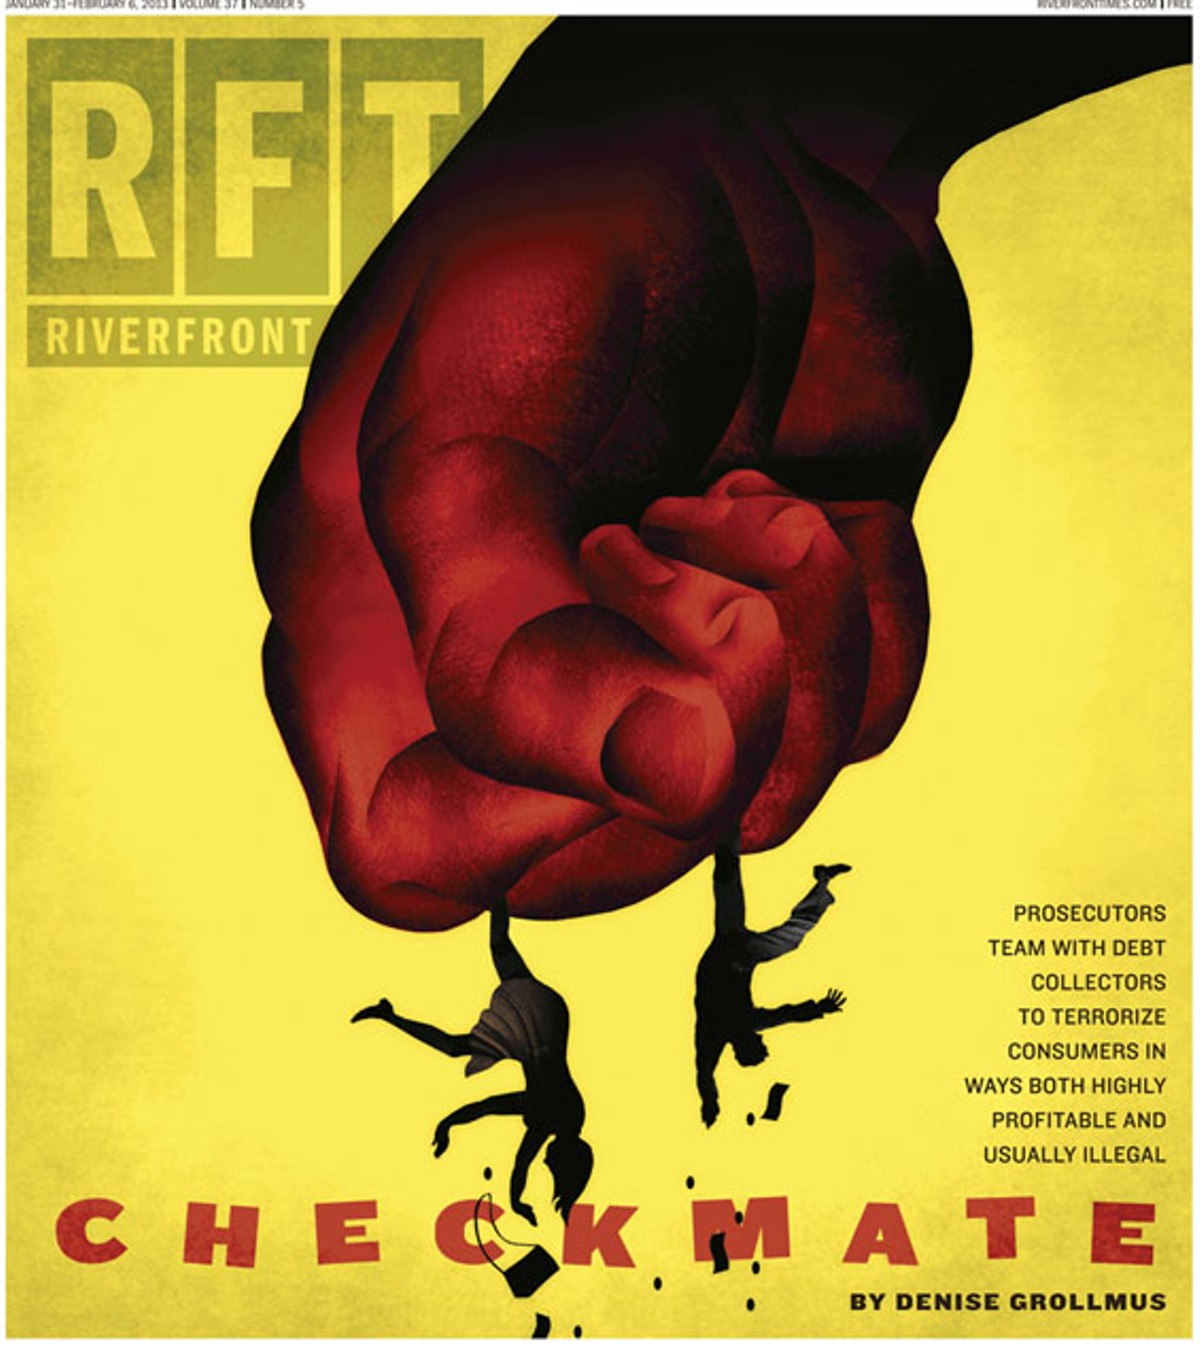 The Cover of the January 31 Print Edition